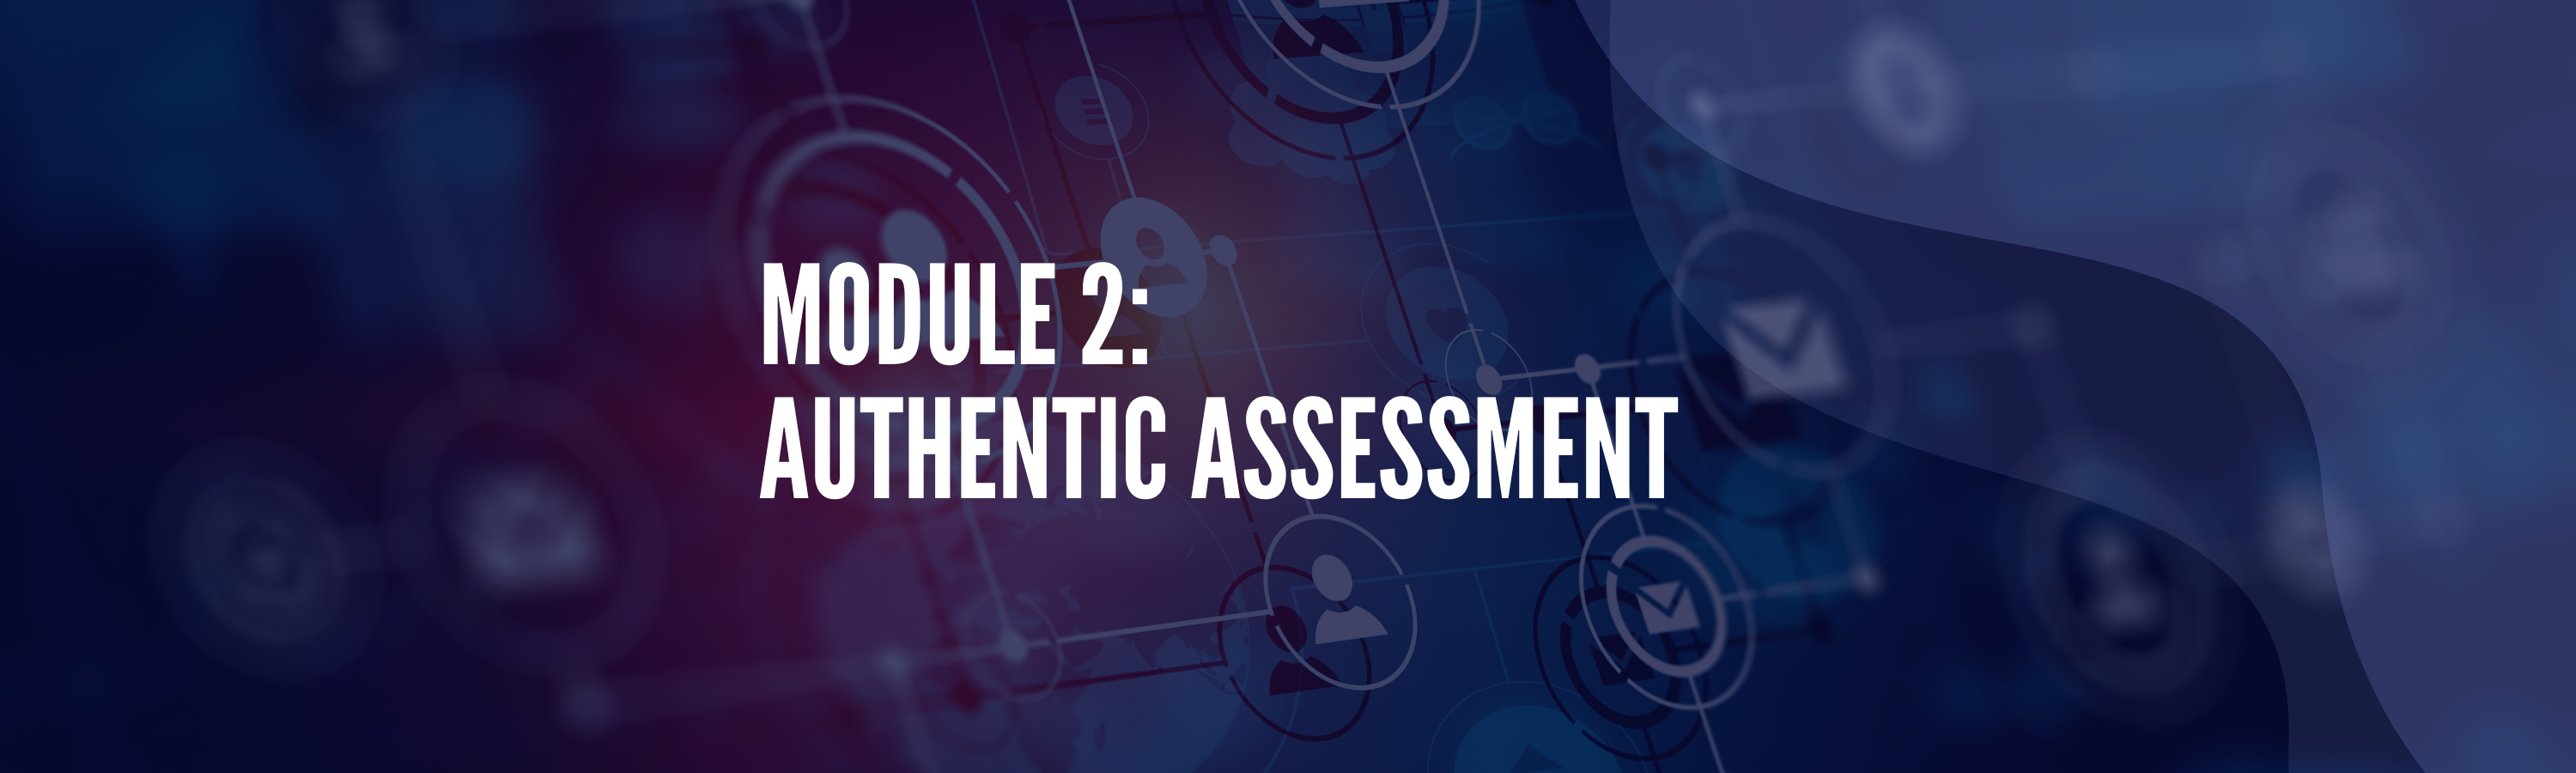 Module 2 - Authentic Assessment banner